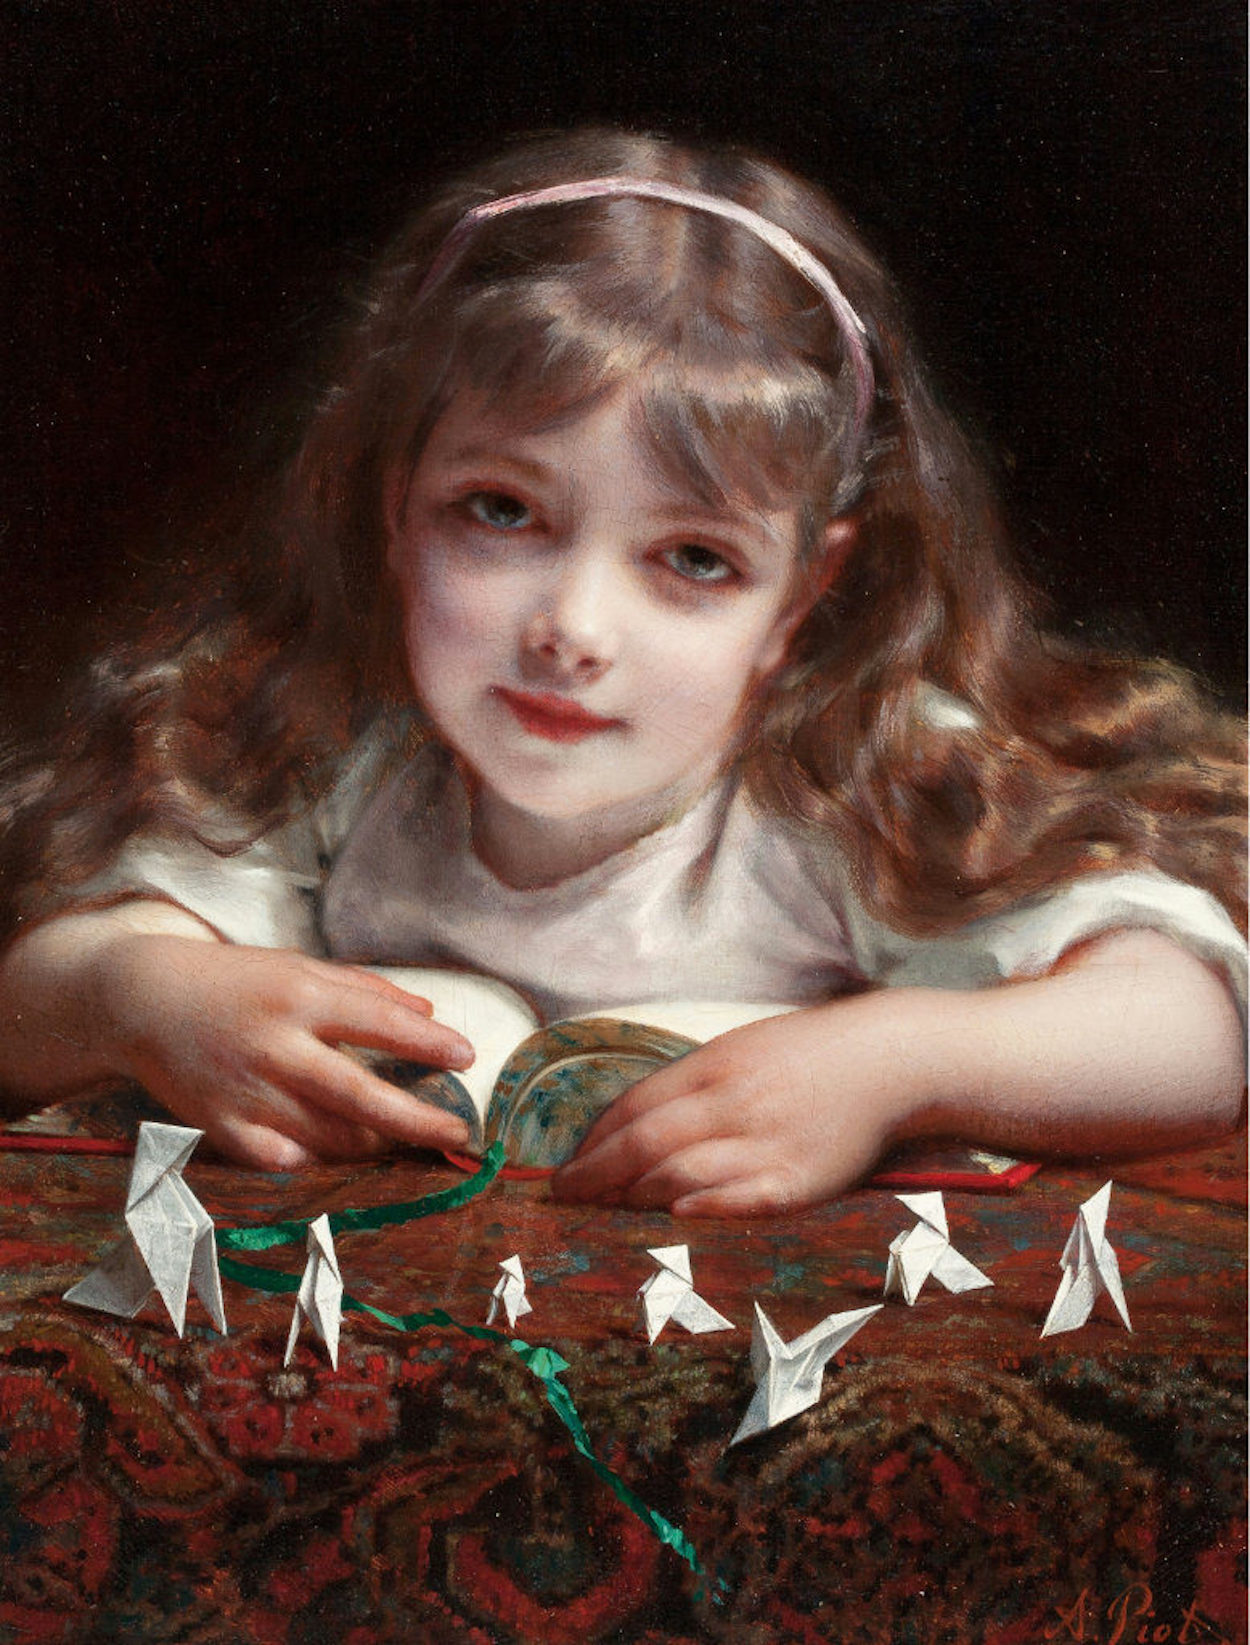 Origami sny by Adolphe Piot - 1850-1910 - 52 x 39,5 cm 